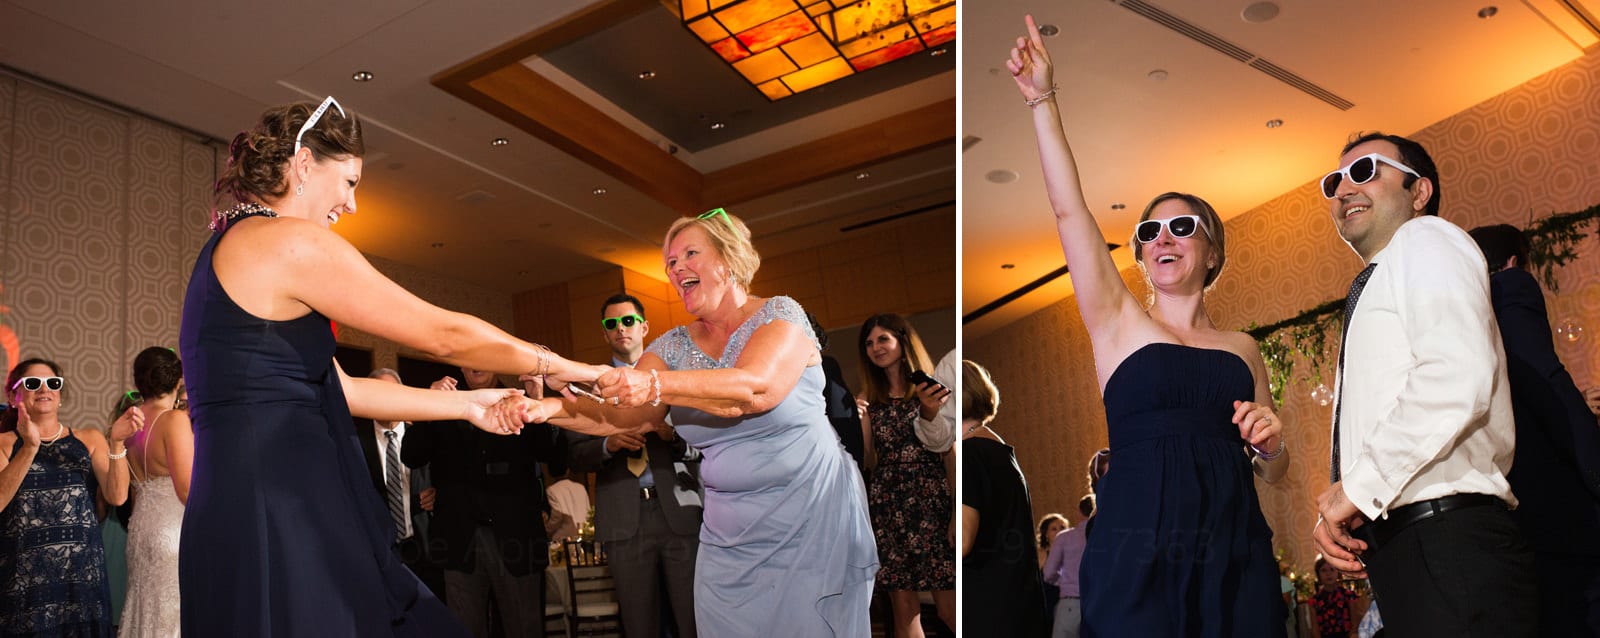 Two smiling woman dancing hand in hand and a couple wearing sunglasses during Wedding Photography at Fairmont Hotel Pittsburgh.